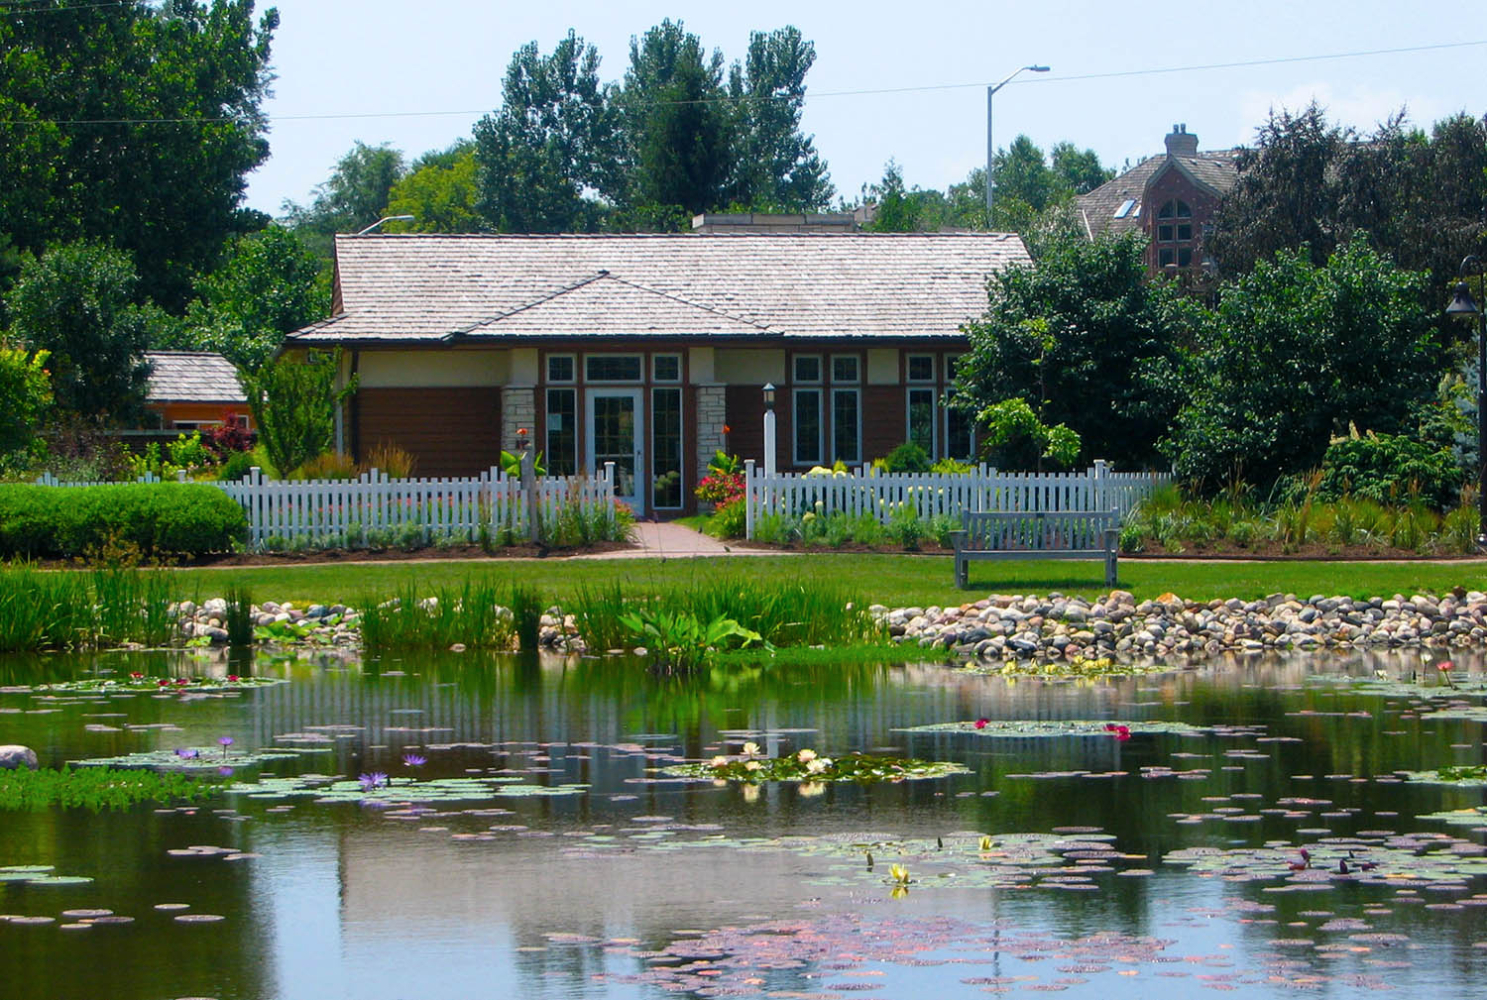 View of front of Hunziker House from across Lake Helen.